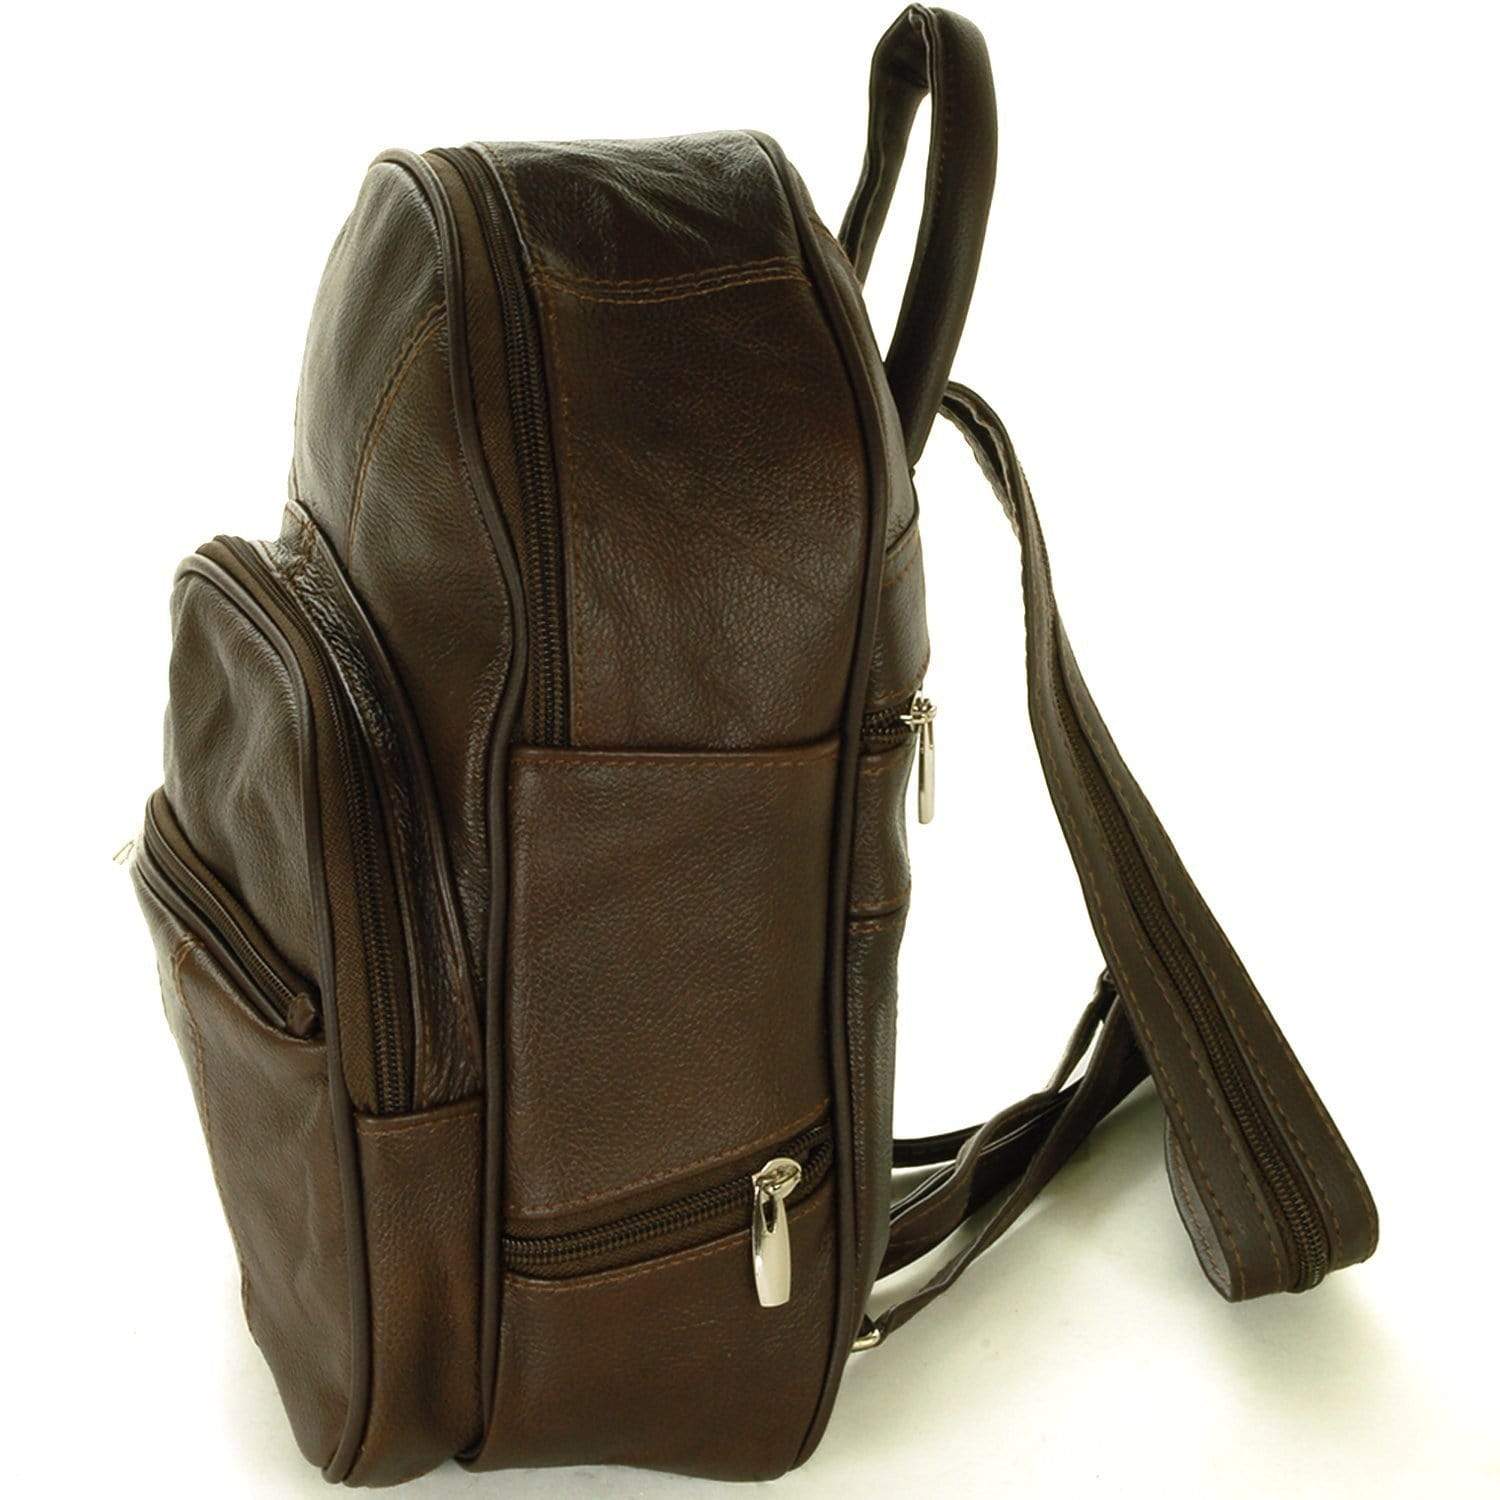 Backpack with shoulder strap IT BAGS real leather bags and b2b backpacks  Made in Italy